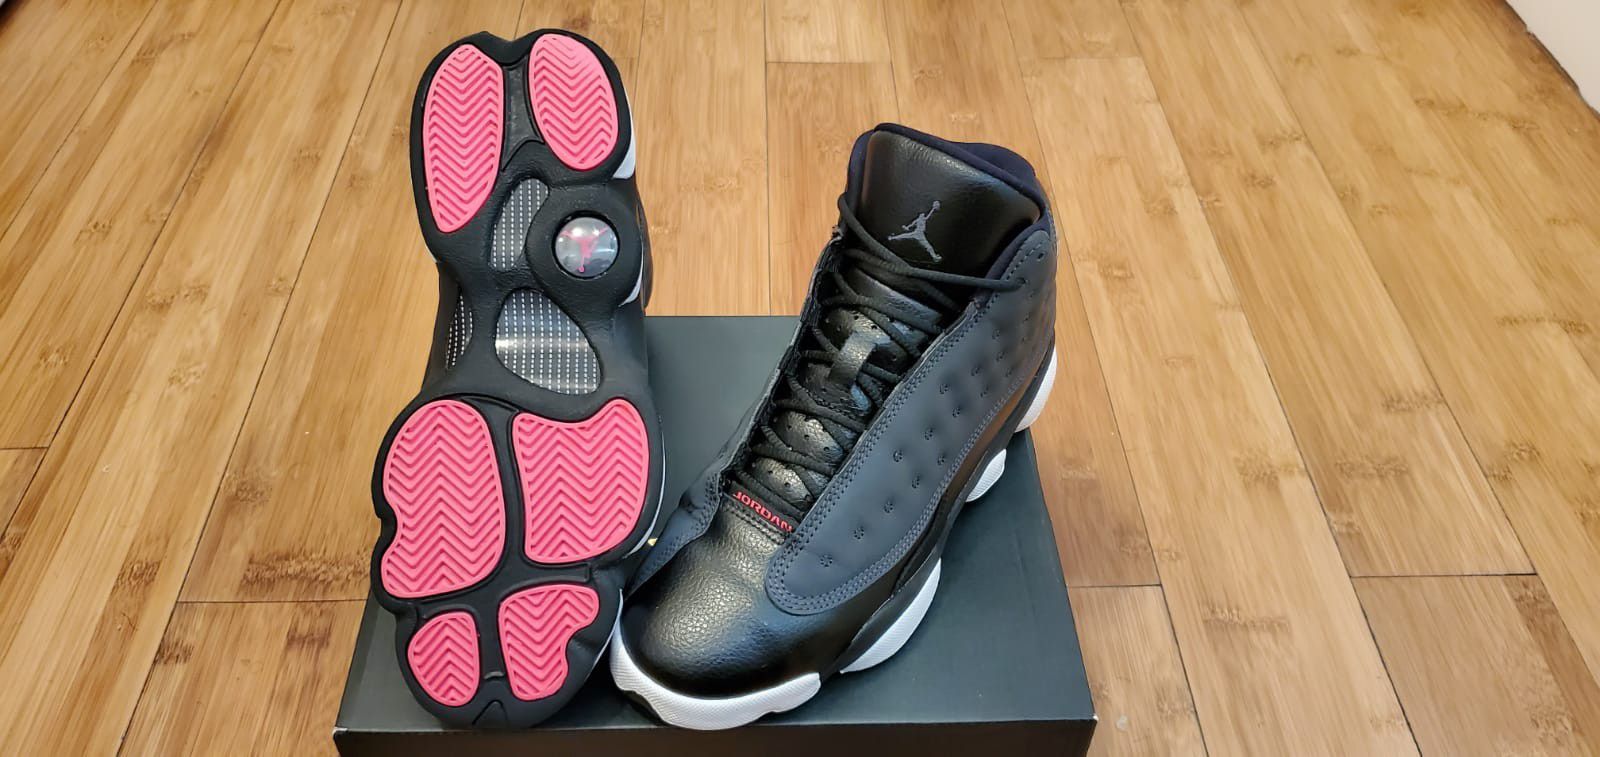 Jordan Retro 13's size 5.5y for youths.